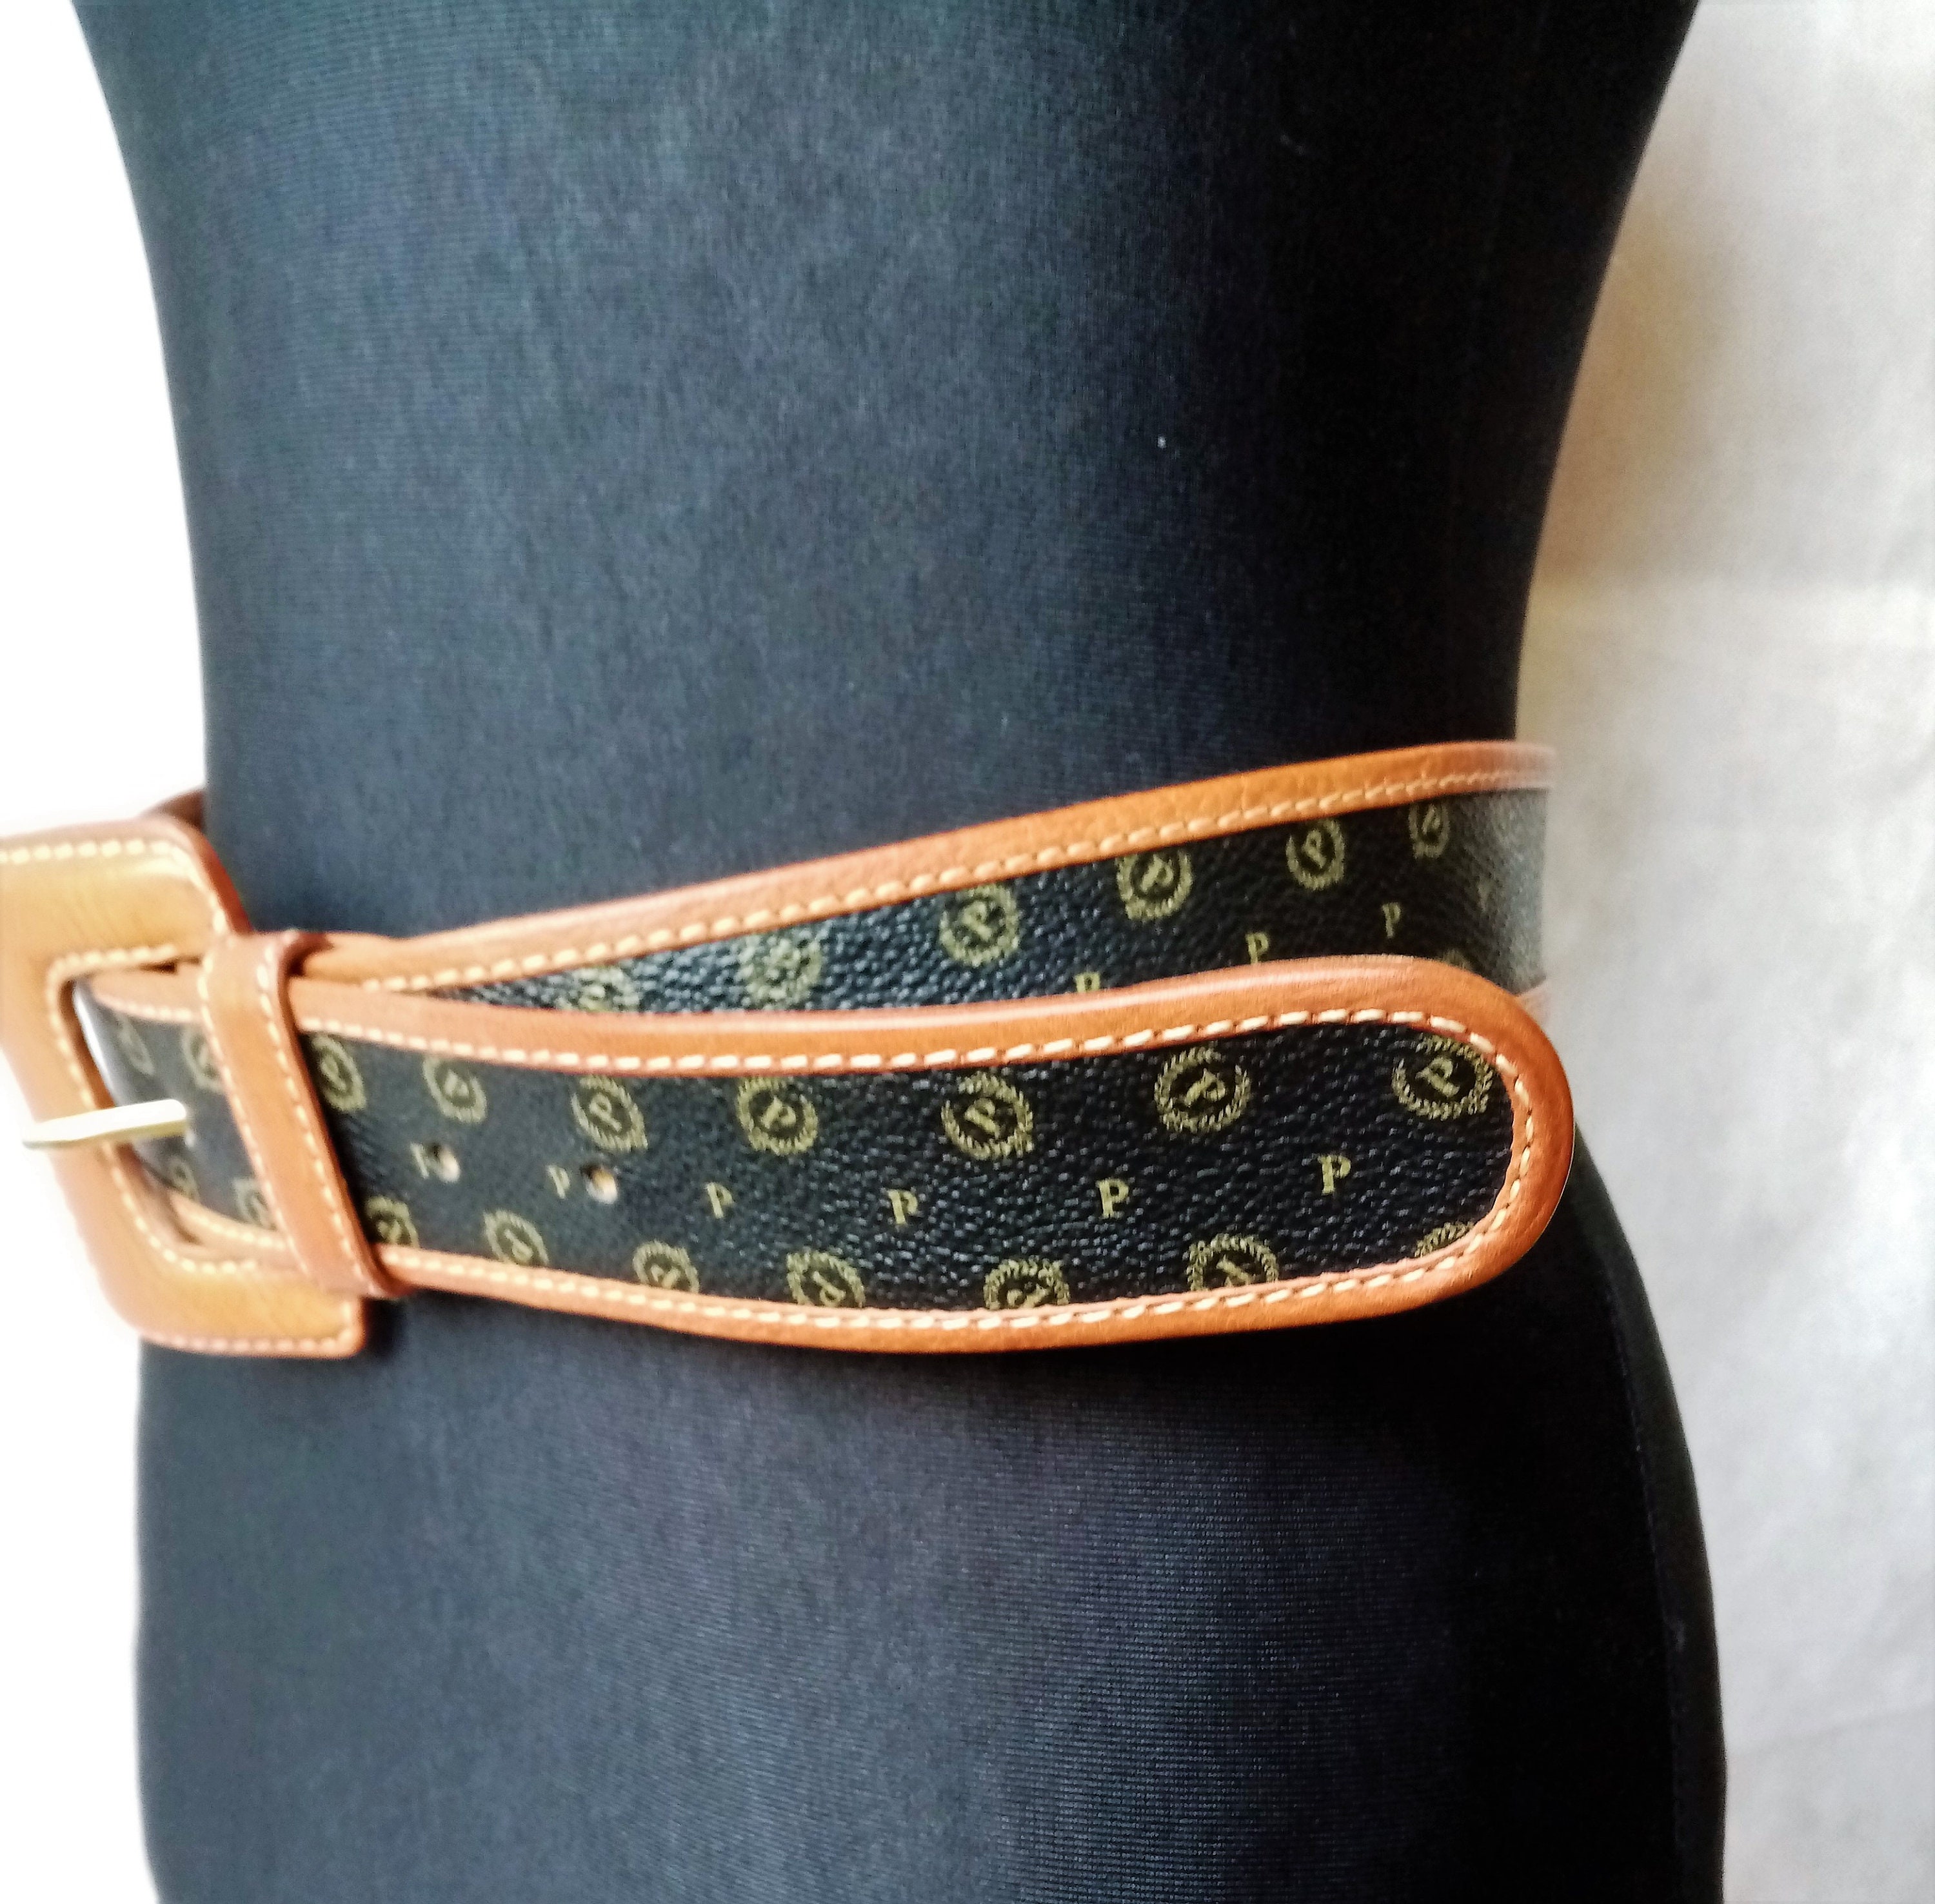 NEW & USED Authentic Louis Vuitton Mahina Belt with Perforated Monogram  Sz 80/32